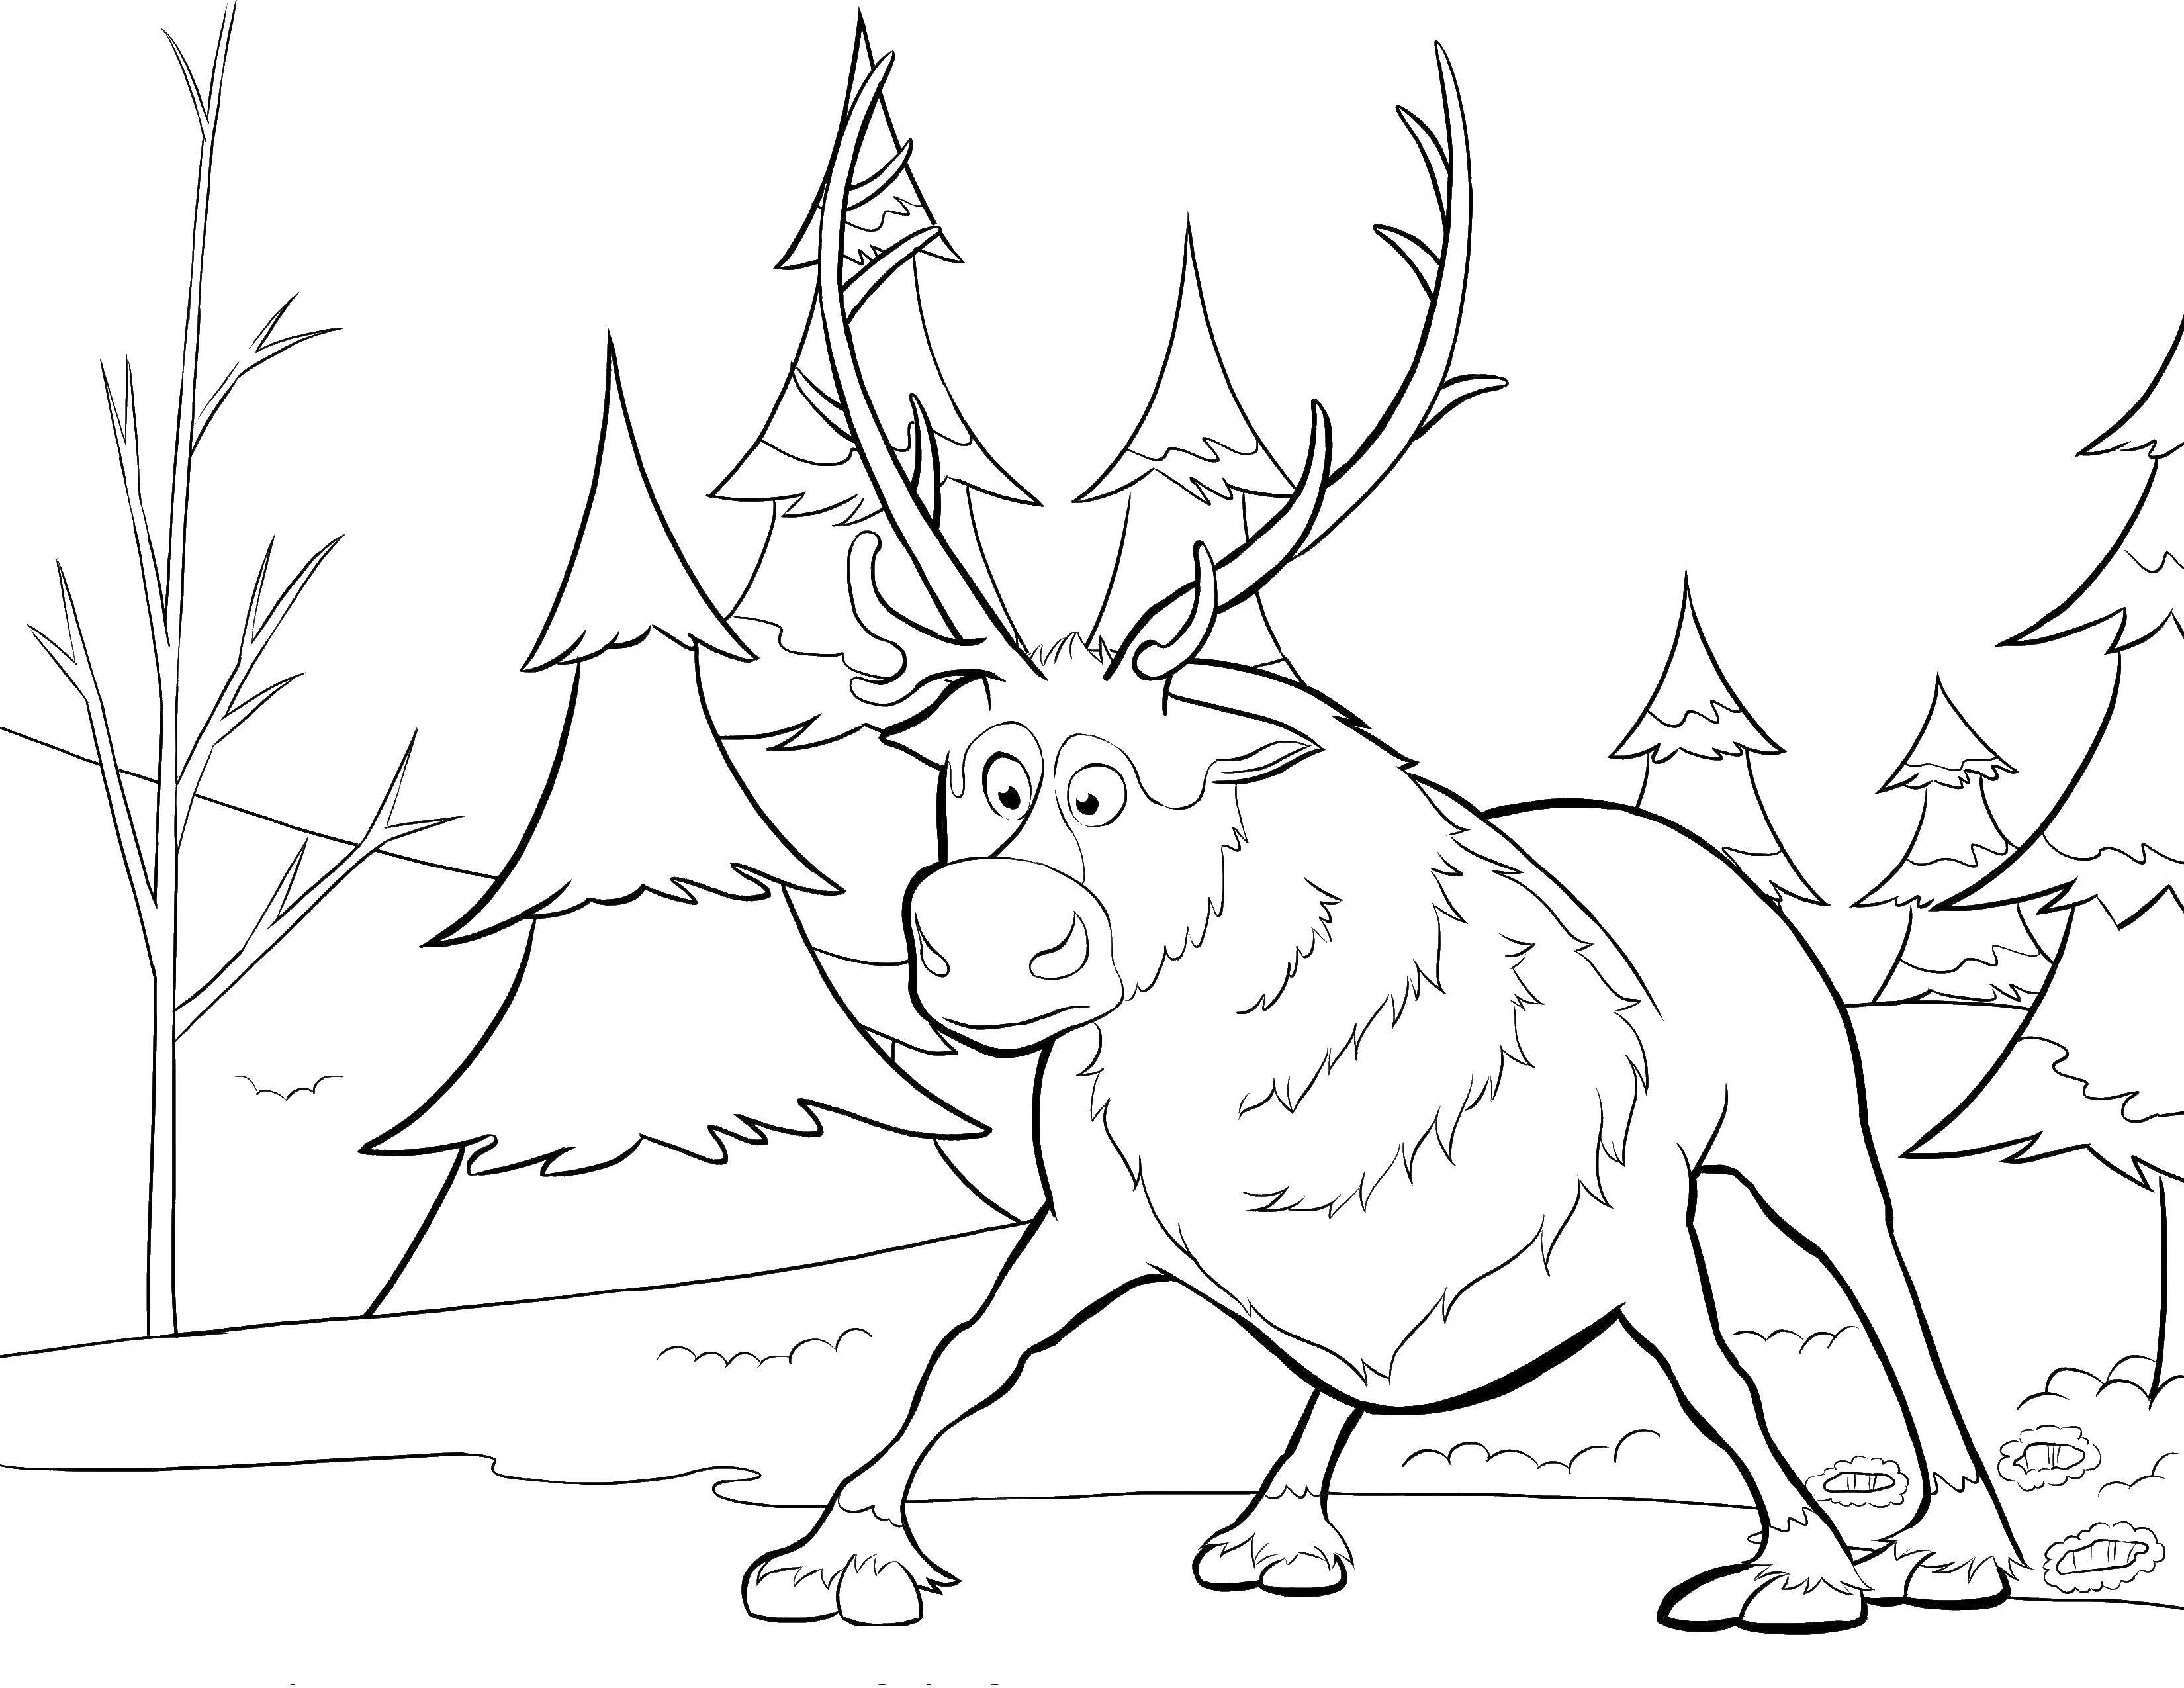 Coloring Moose. Category Animals. Tags:  animals, elk, forest.